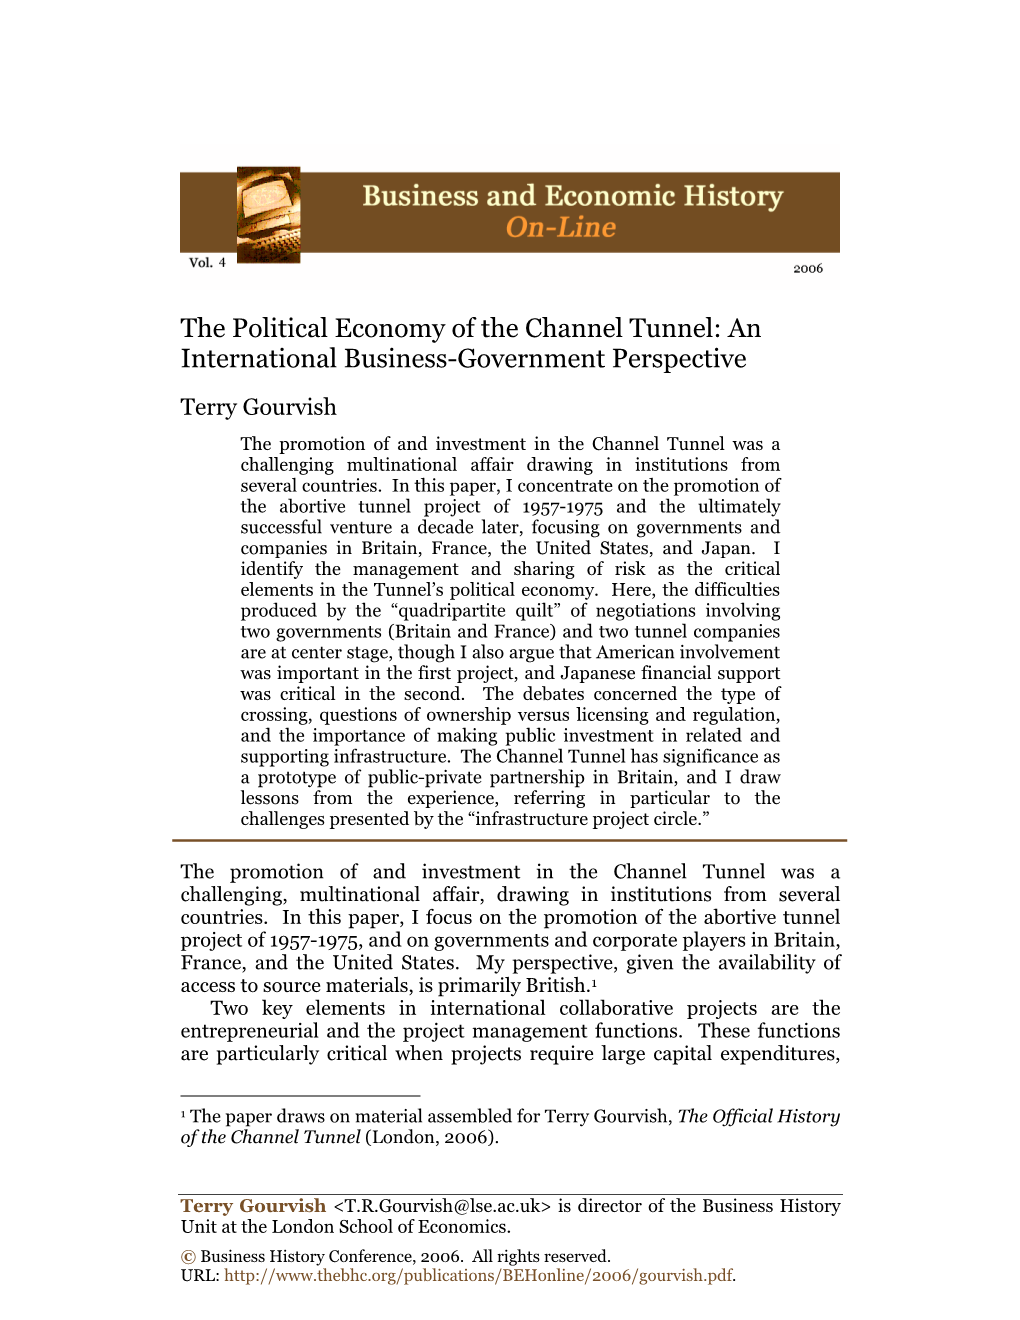 Promoting and Investing in the Channel Tunnel: a Case Study In